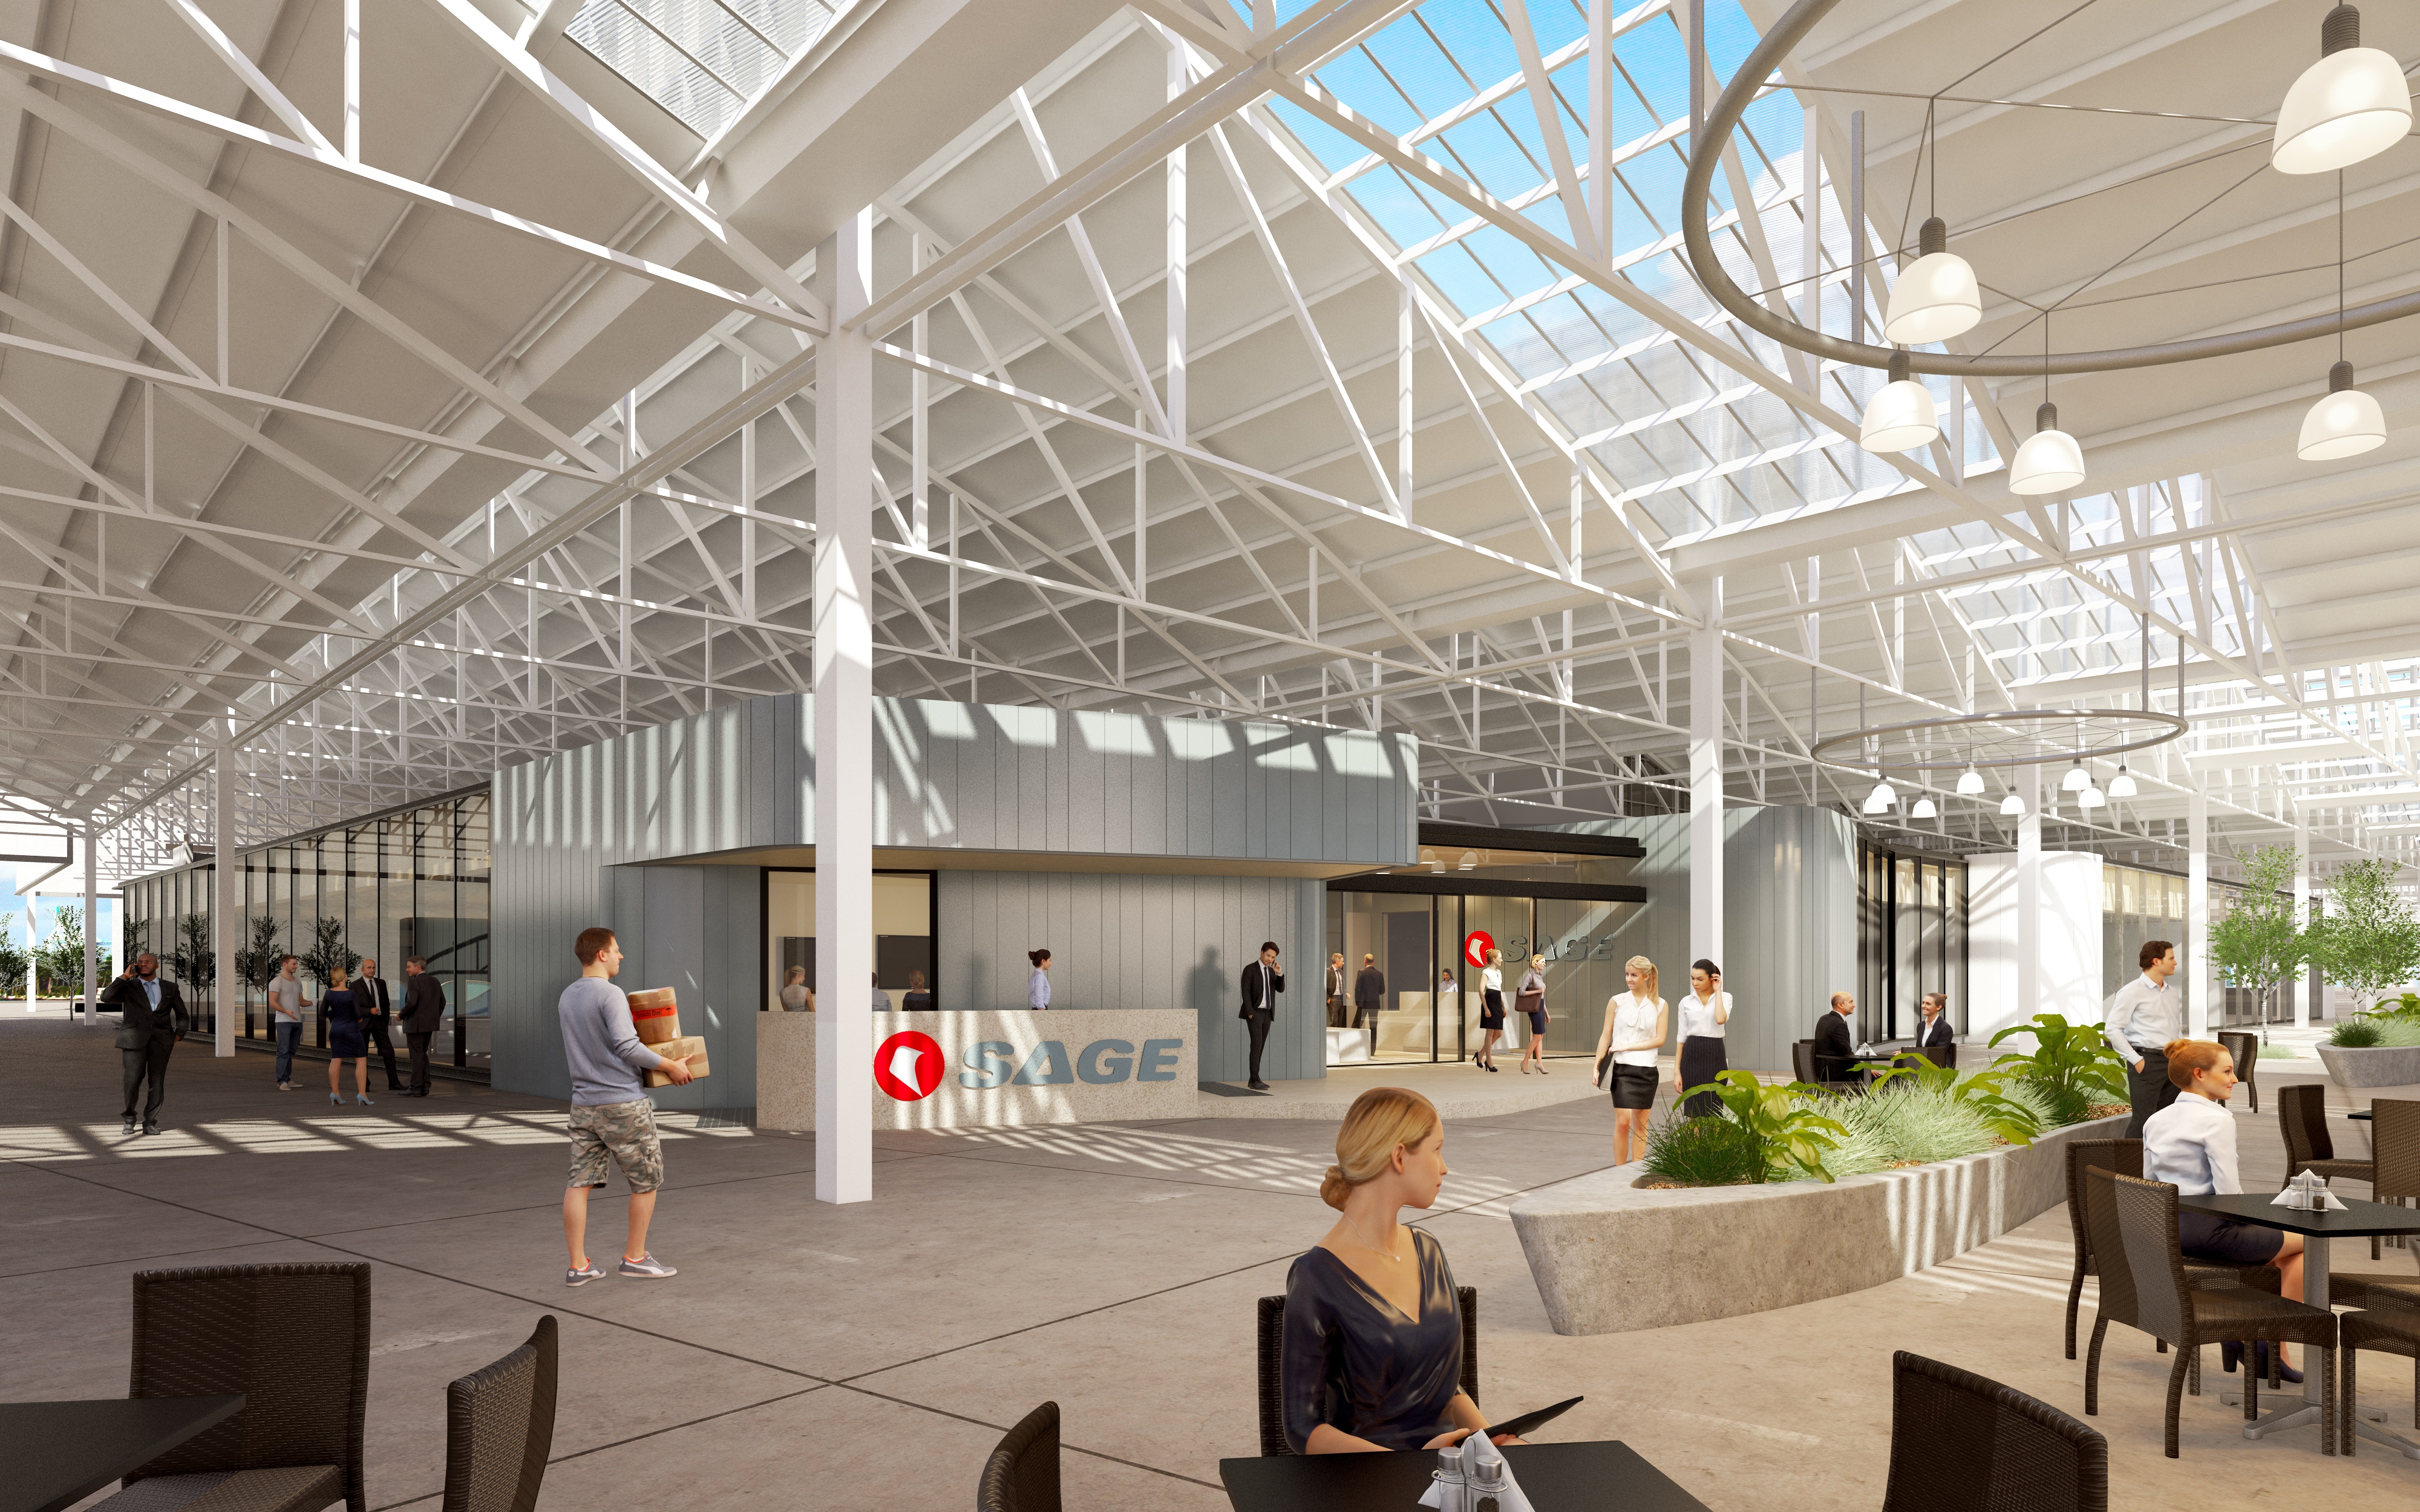 A sneak peak at our new headquarters - Tonsley Innovation Precinct